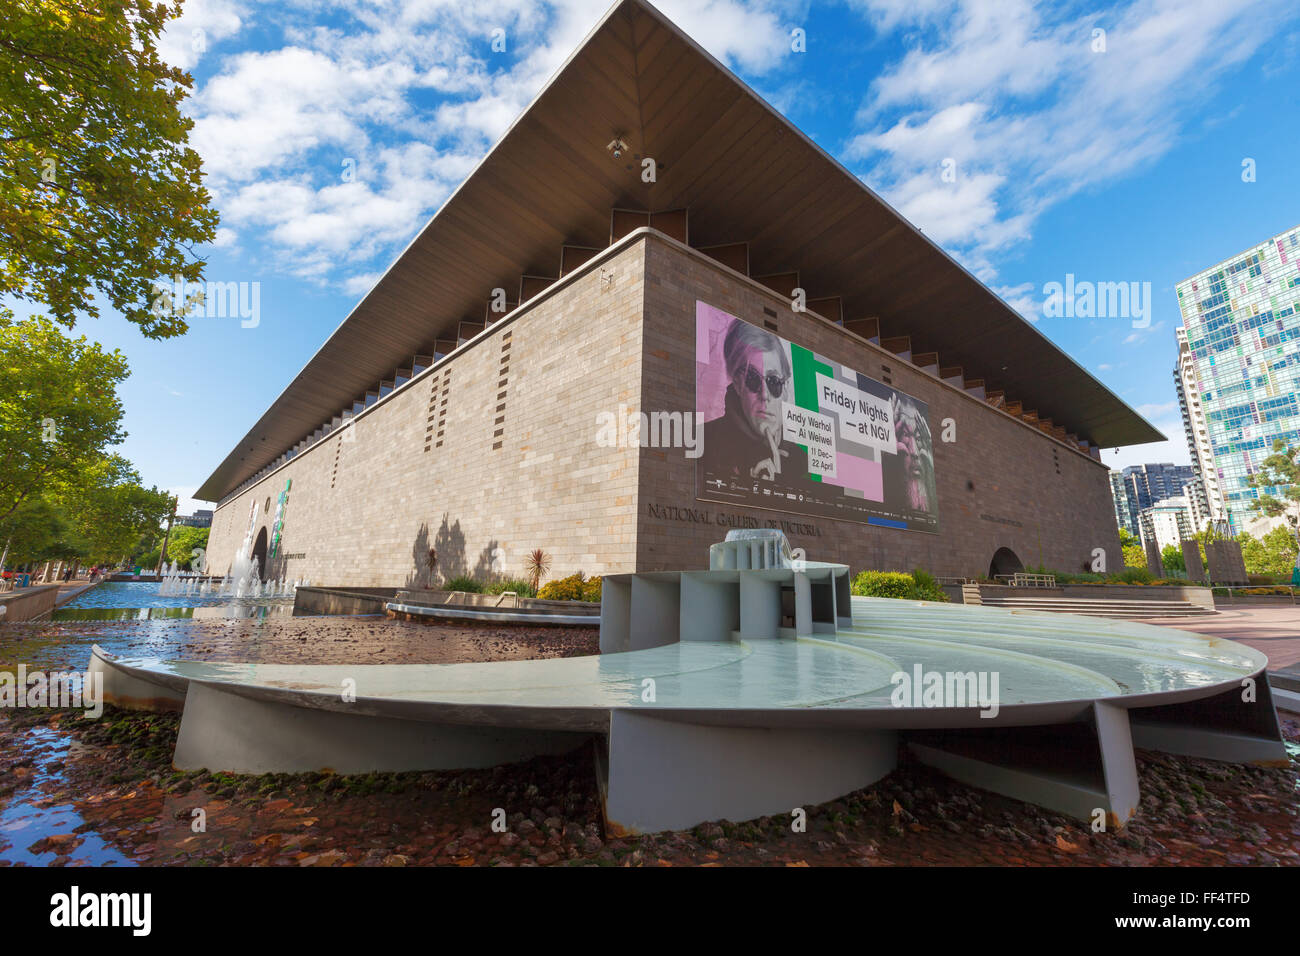 MELBOURNE - JAN 31 2016: National Gallery of Victoria - the oldest and most visited art gallery in Australia Stock Photo